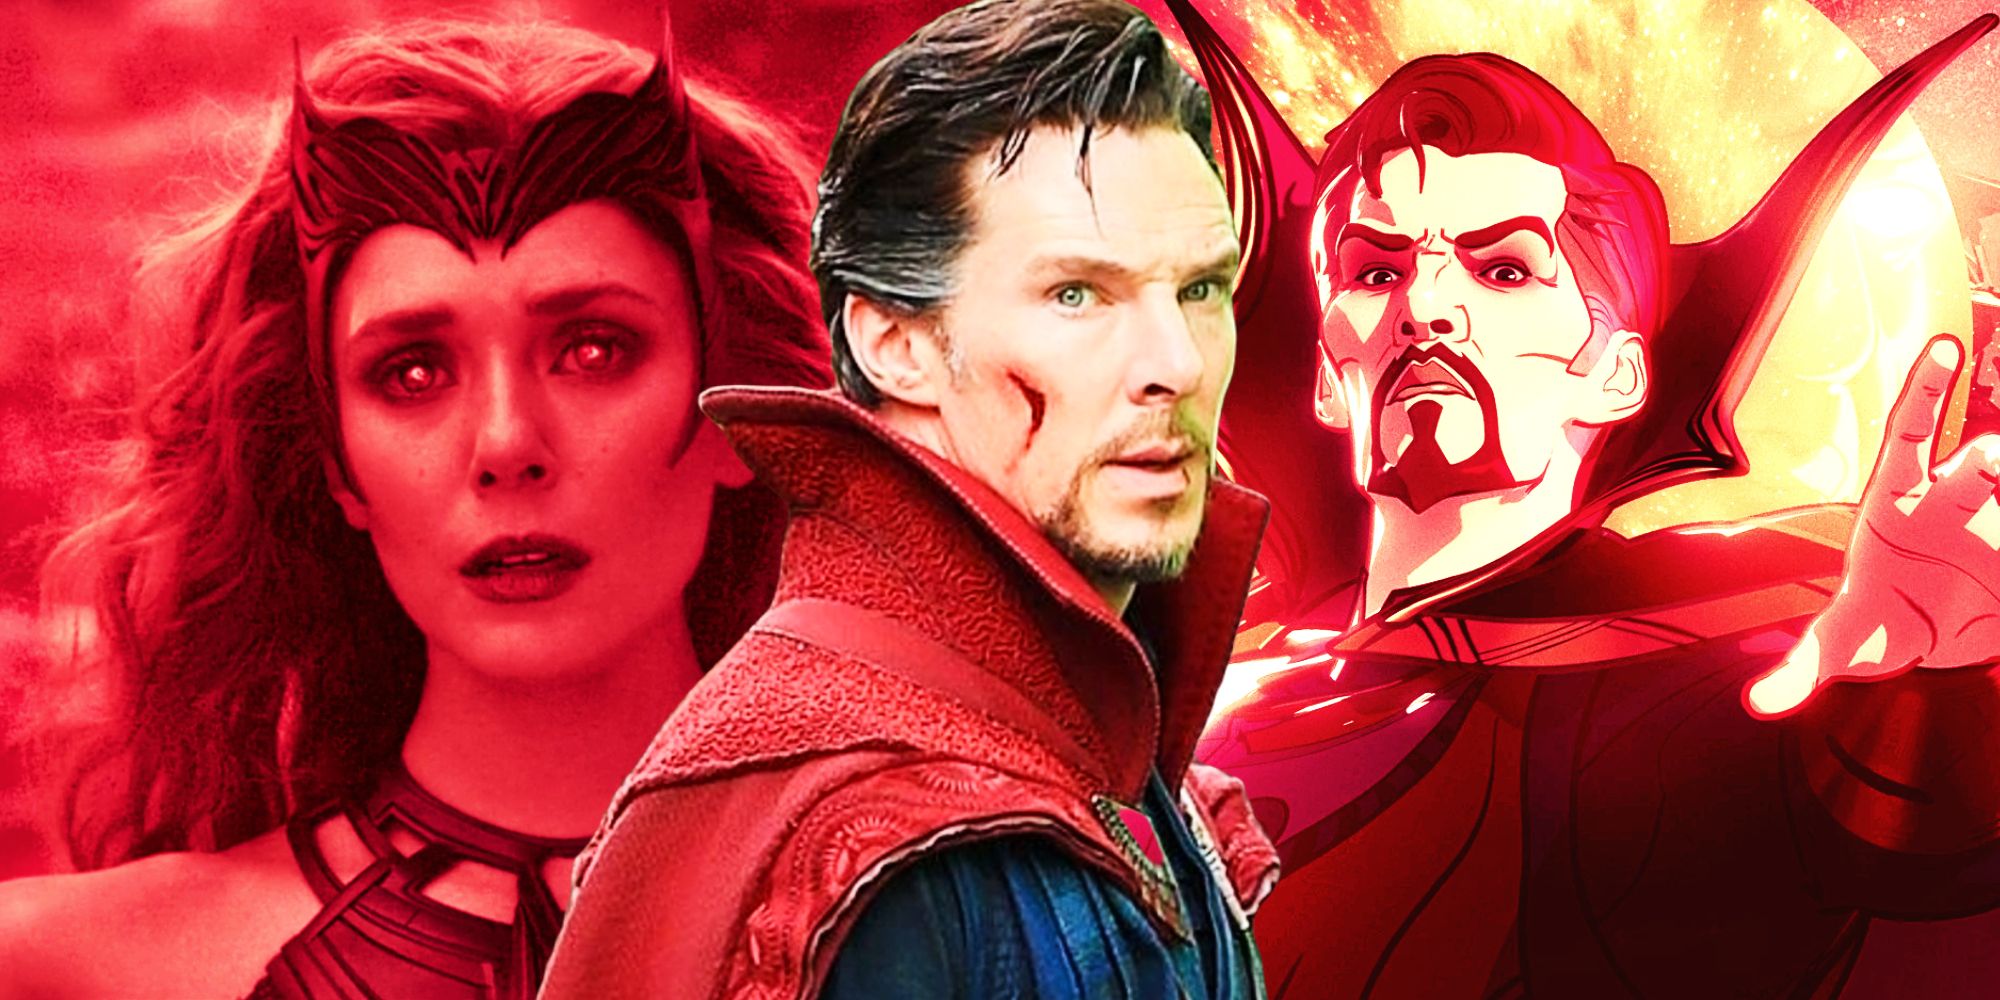 Elizabeth Olsen as Wanda Maximoff aka Scarlet Witch in WandaVision and Benedict Cumberbatch as Doctor Strange in Multiverse of Madness and What If